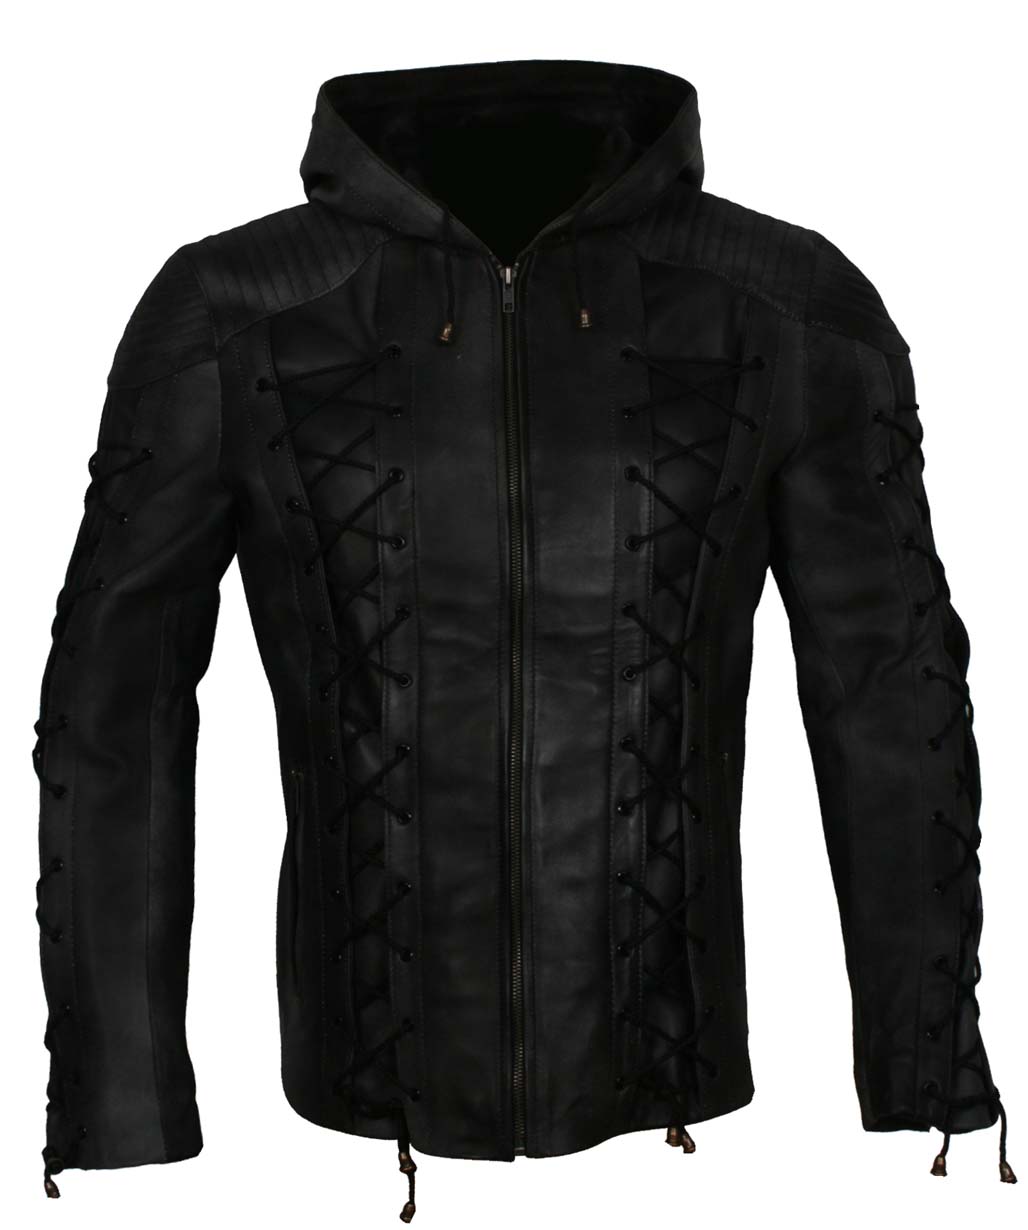 Stephen-Amell-Olive-Queen-Arrow-Leather-Jacket-with-Hoodie